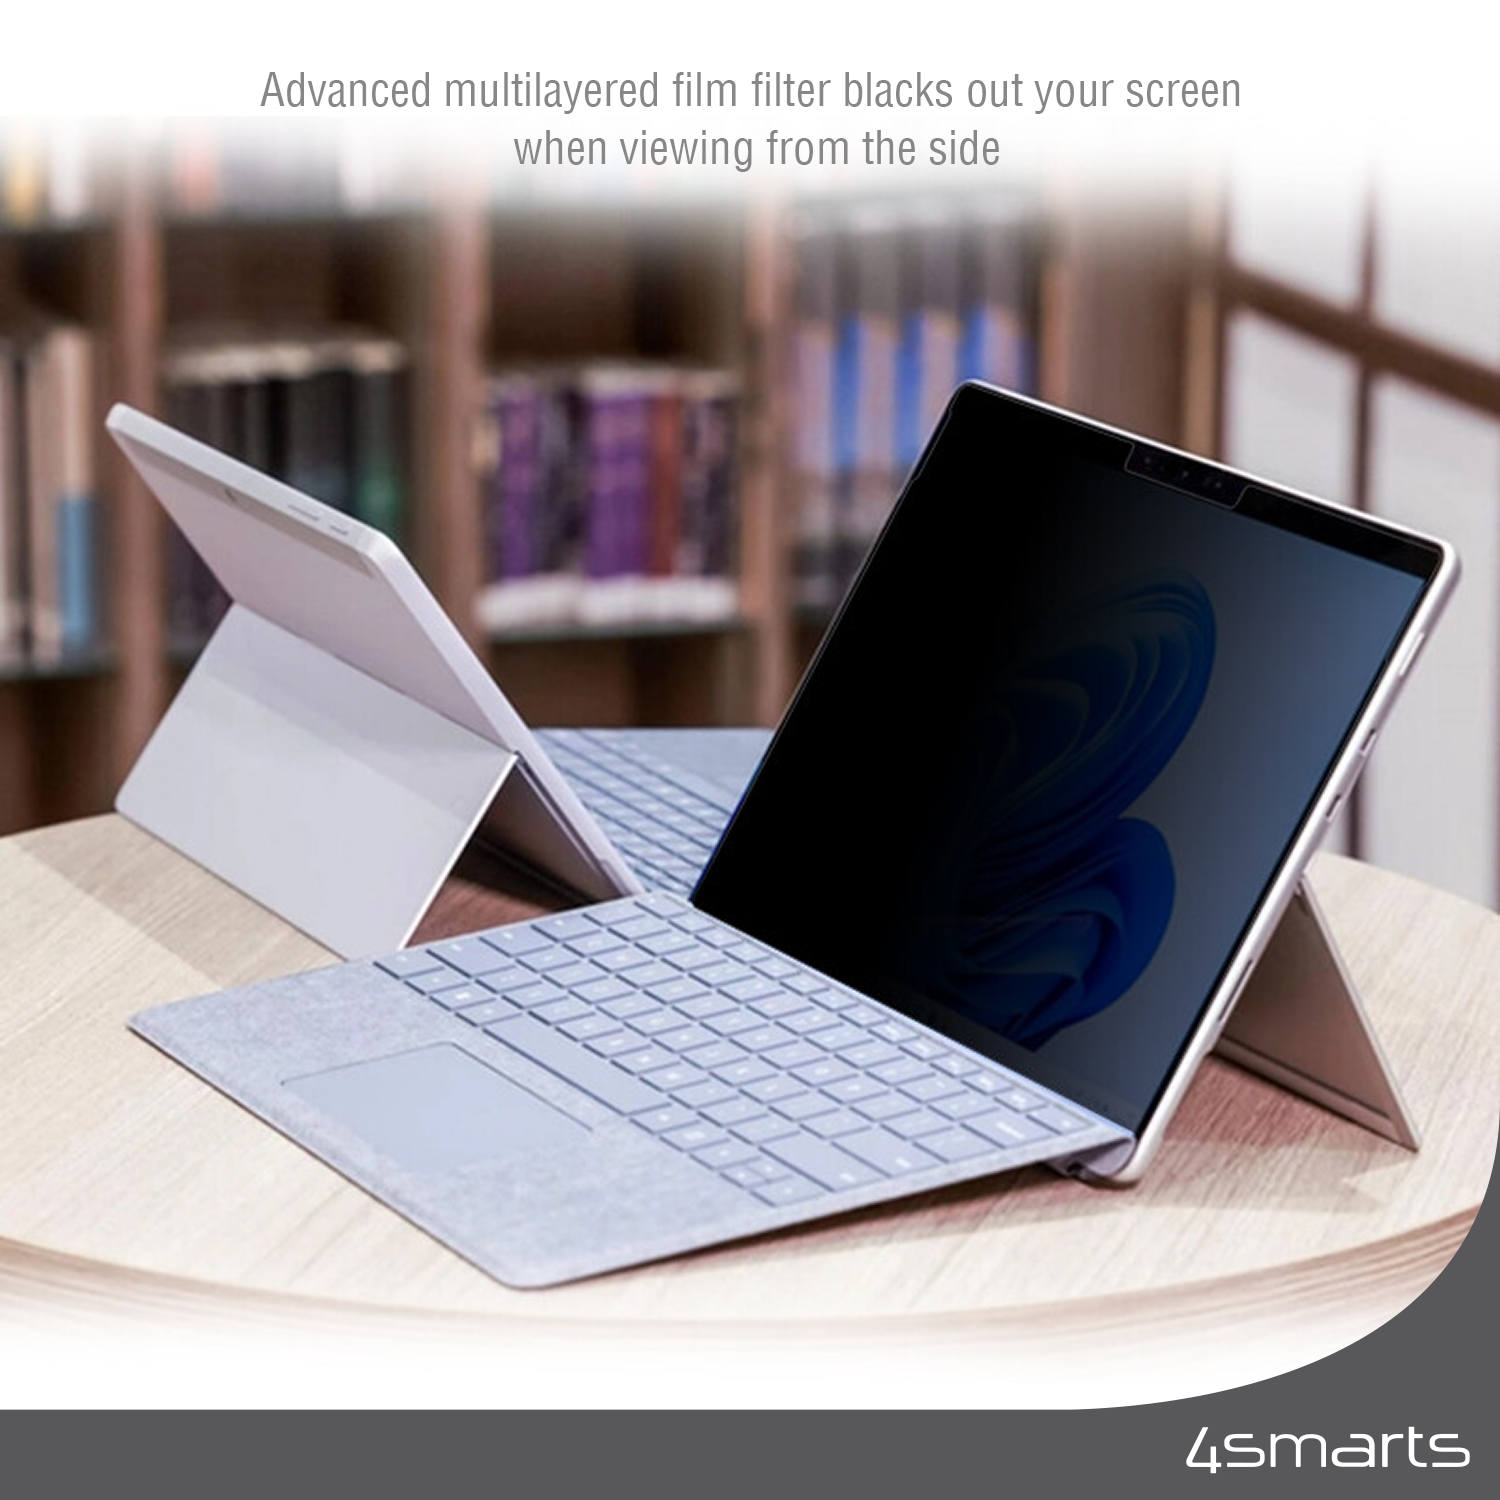 With our 4smarts Smartprotect privacy screen protector only you see what’s on your Microsoft Surface Pro 7+ screen. 